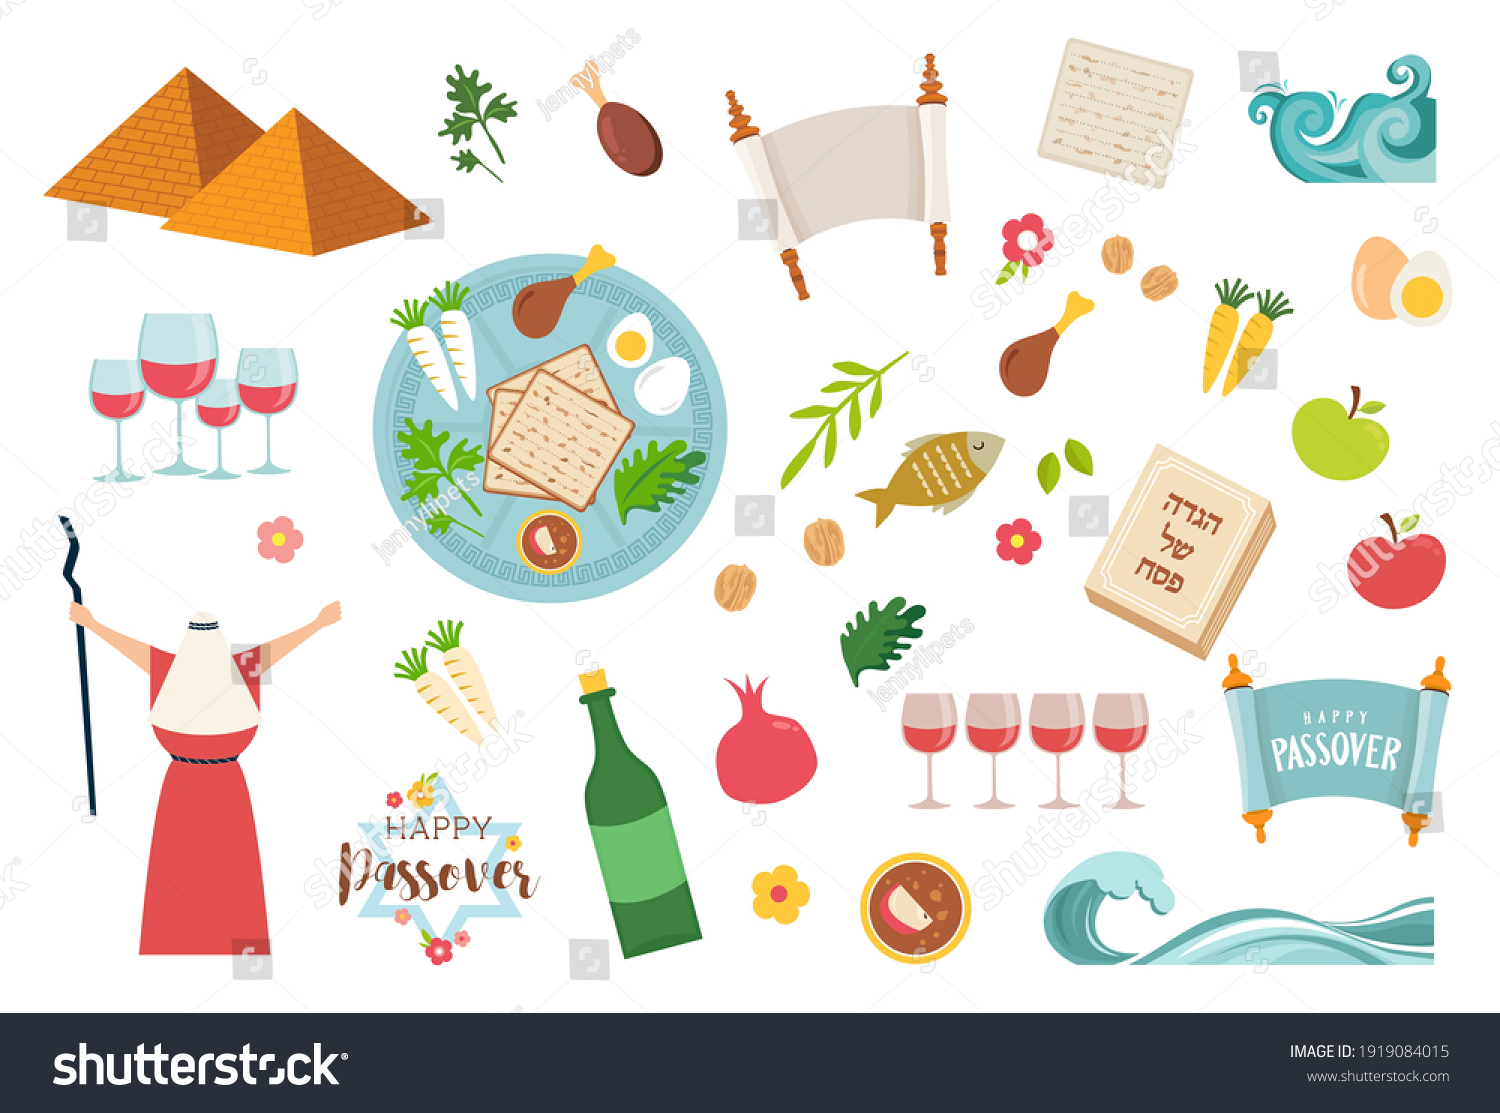 Passover icons set. flat, cartoon style. Jewish holiday of exodus Egypt. Collection with Seder plate, meal, matzah, wine, torus, pyramid. Isolated on white background. Passover Haggadah in Hebrew #1919084015